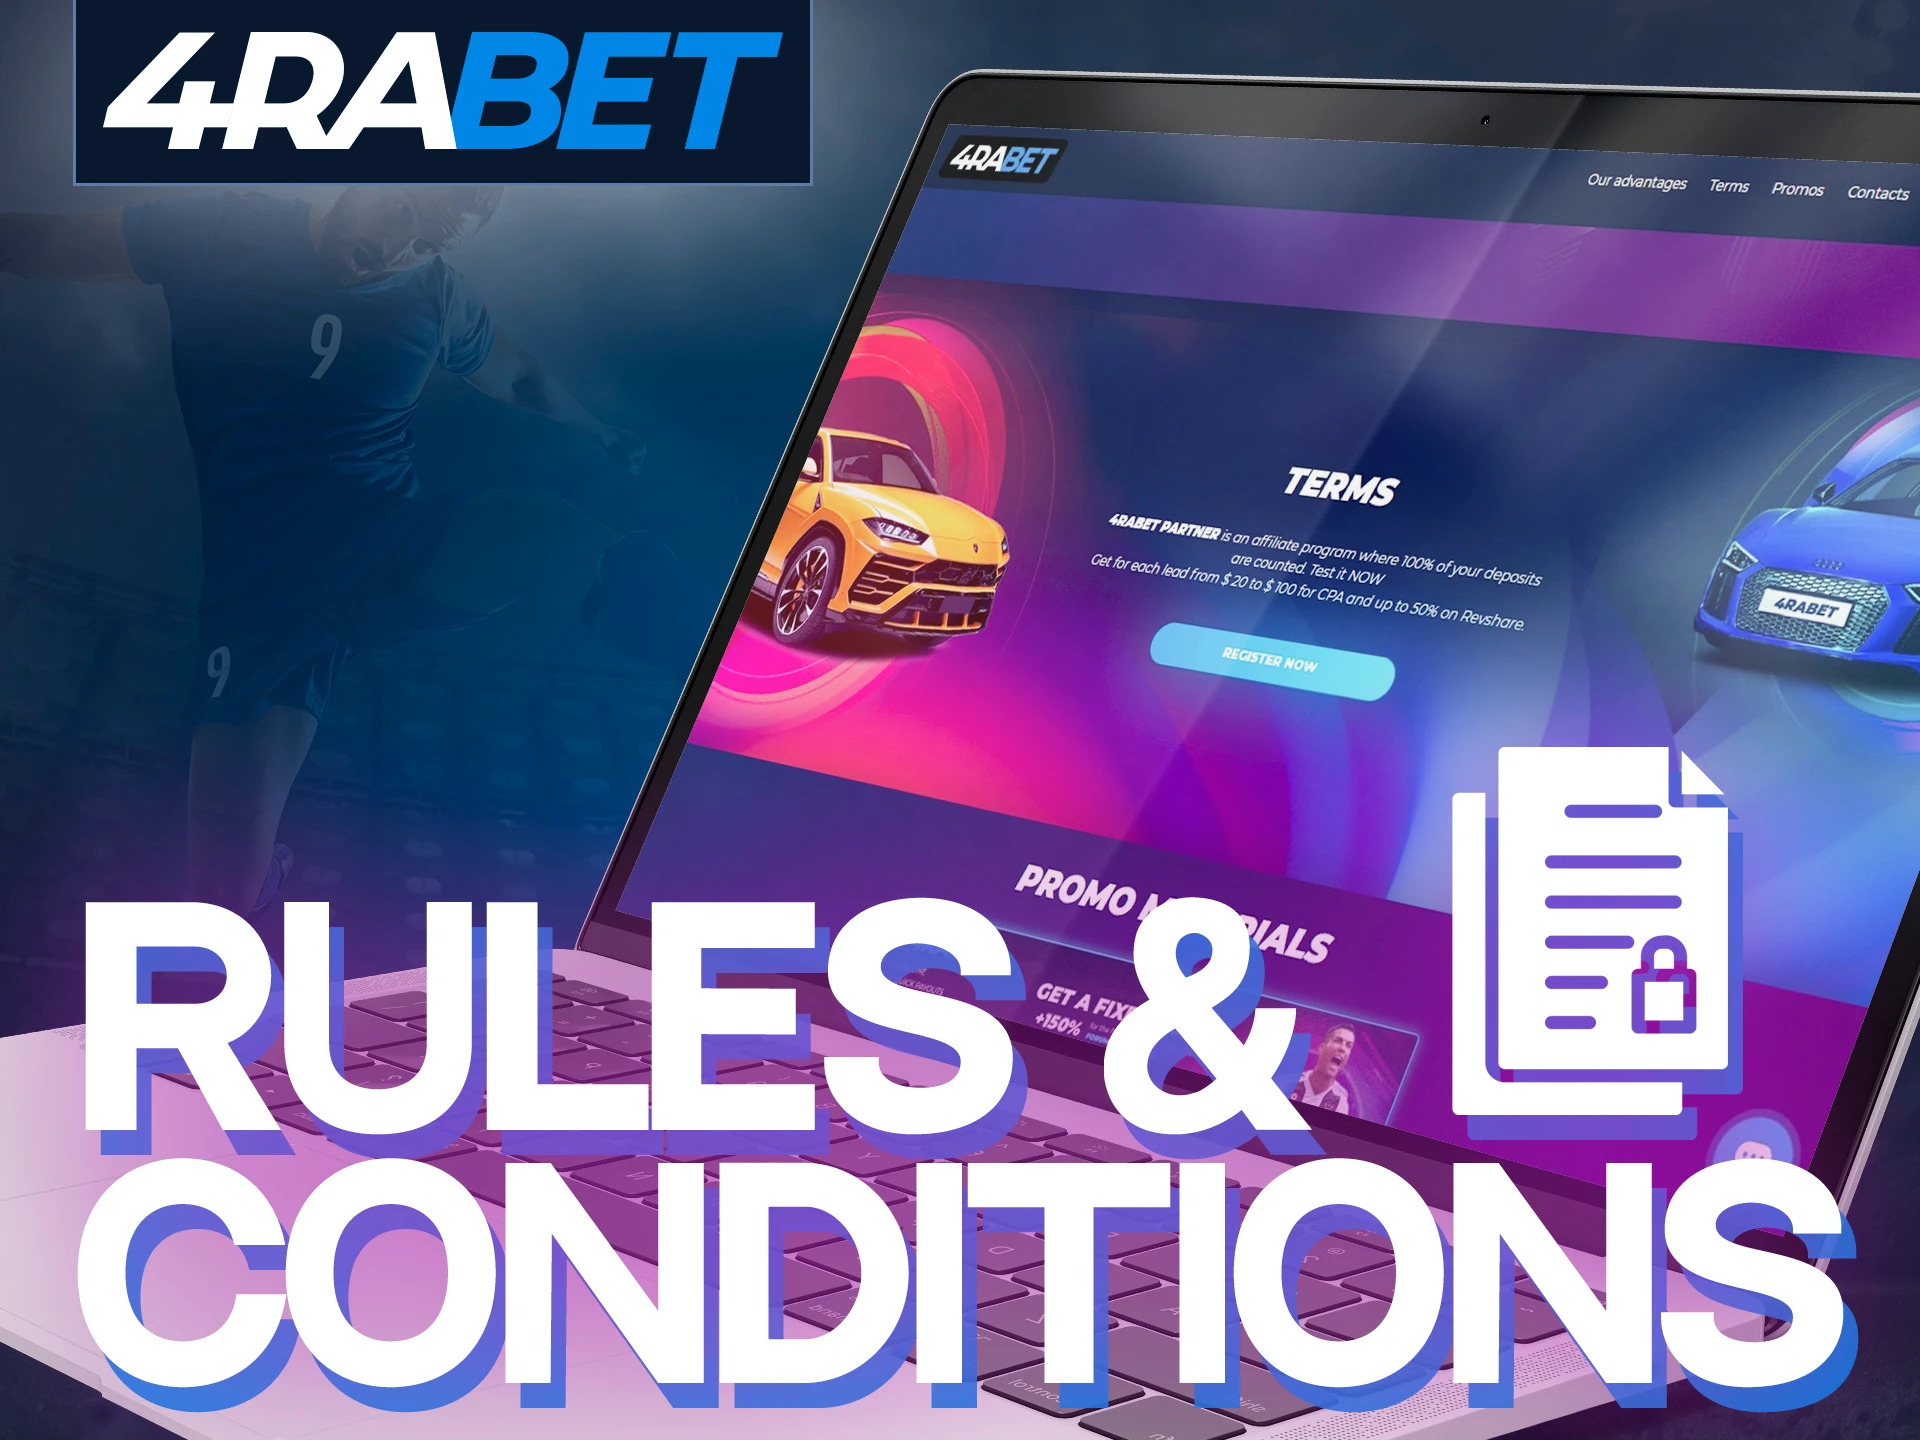 Read and follow 4rabet affiliate program rules.